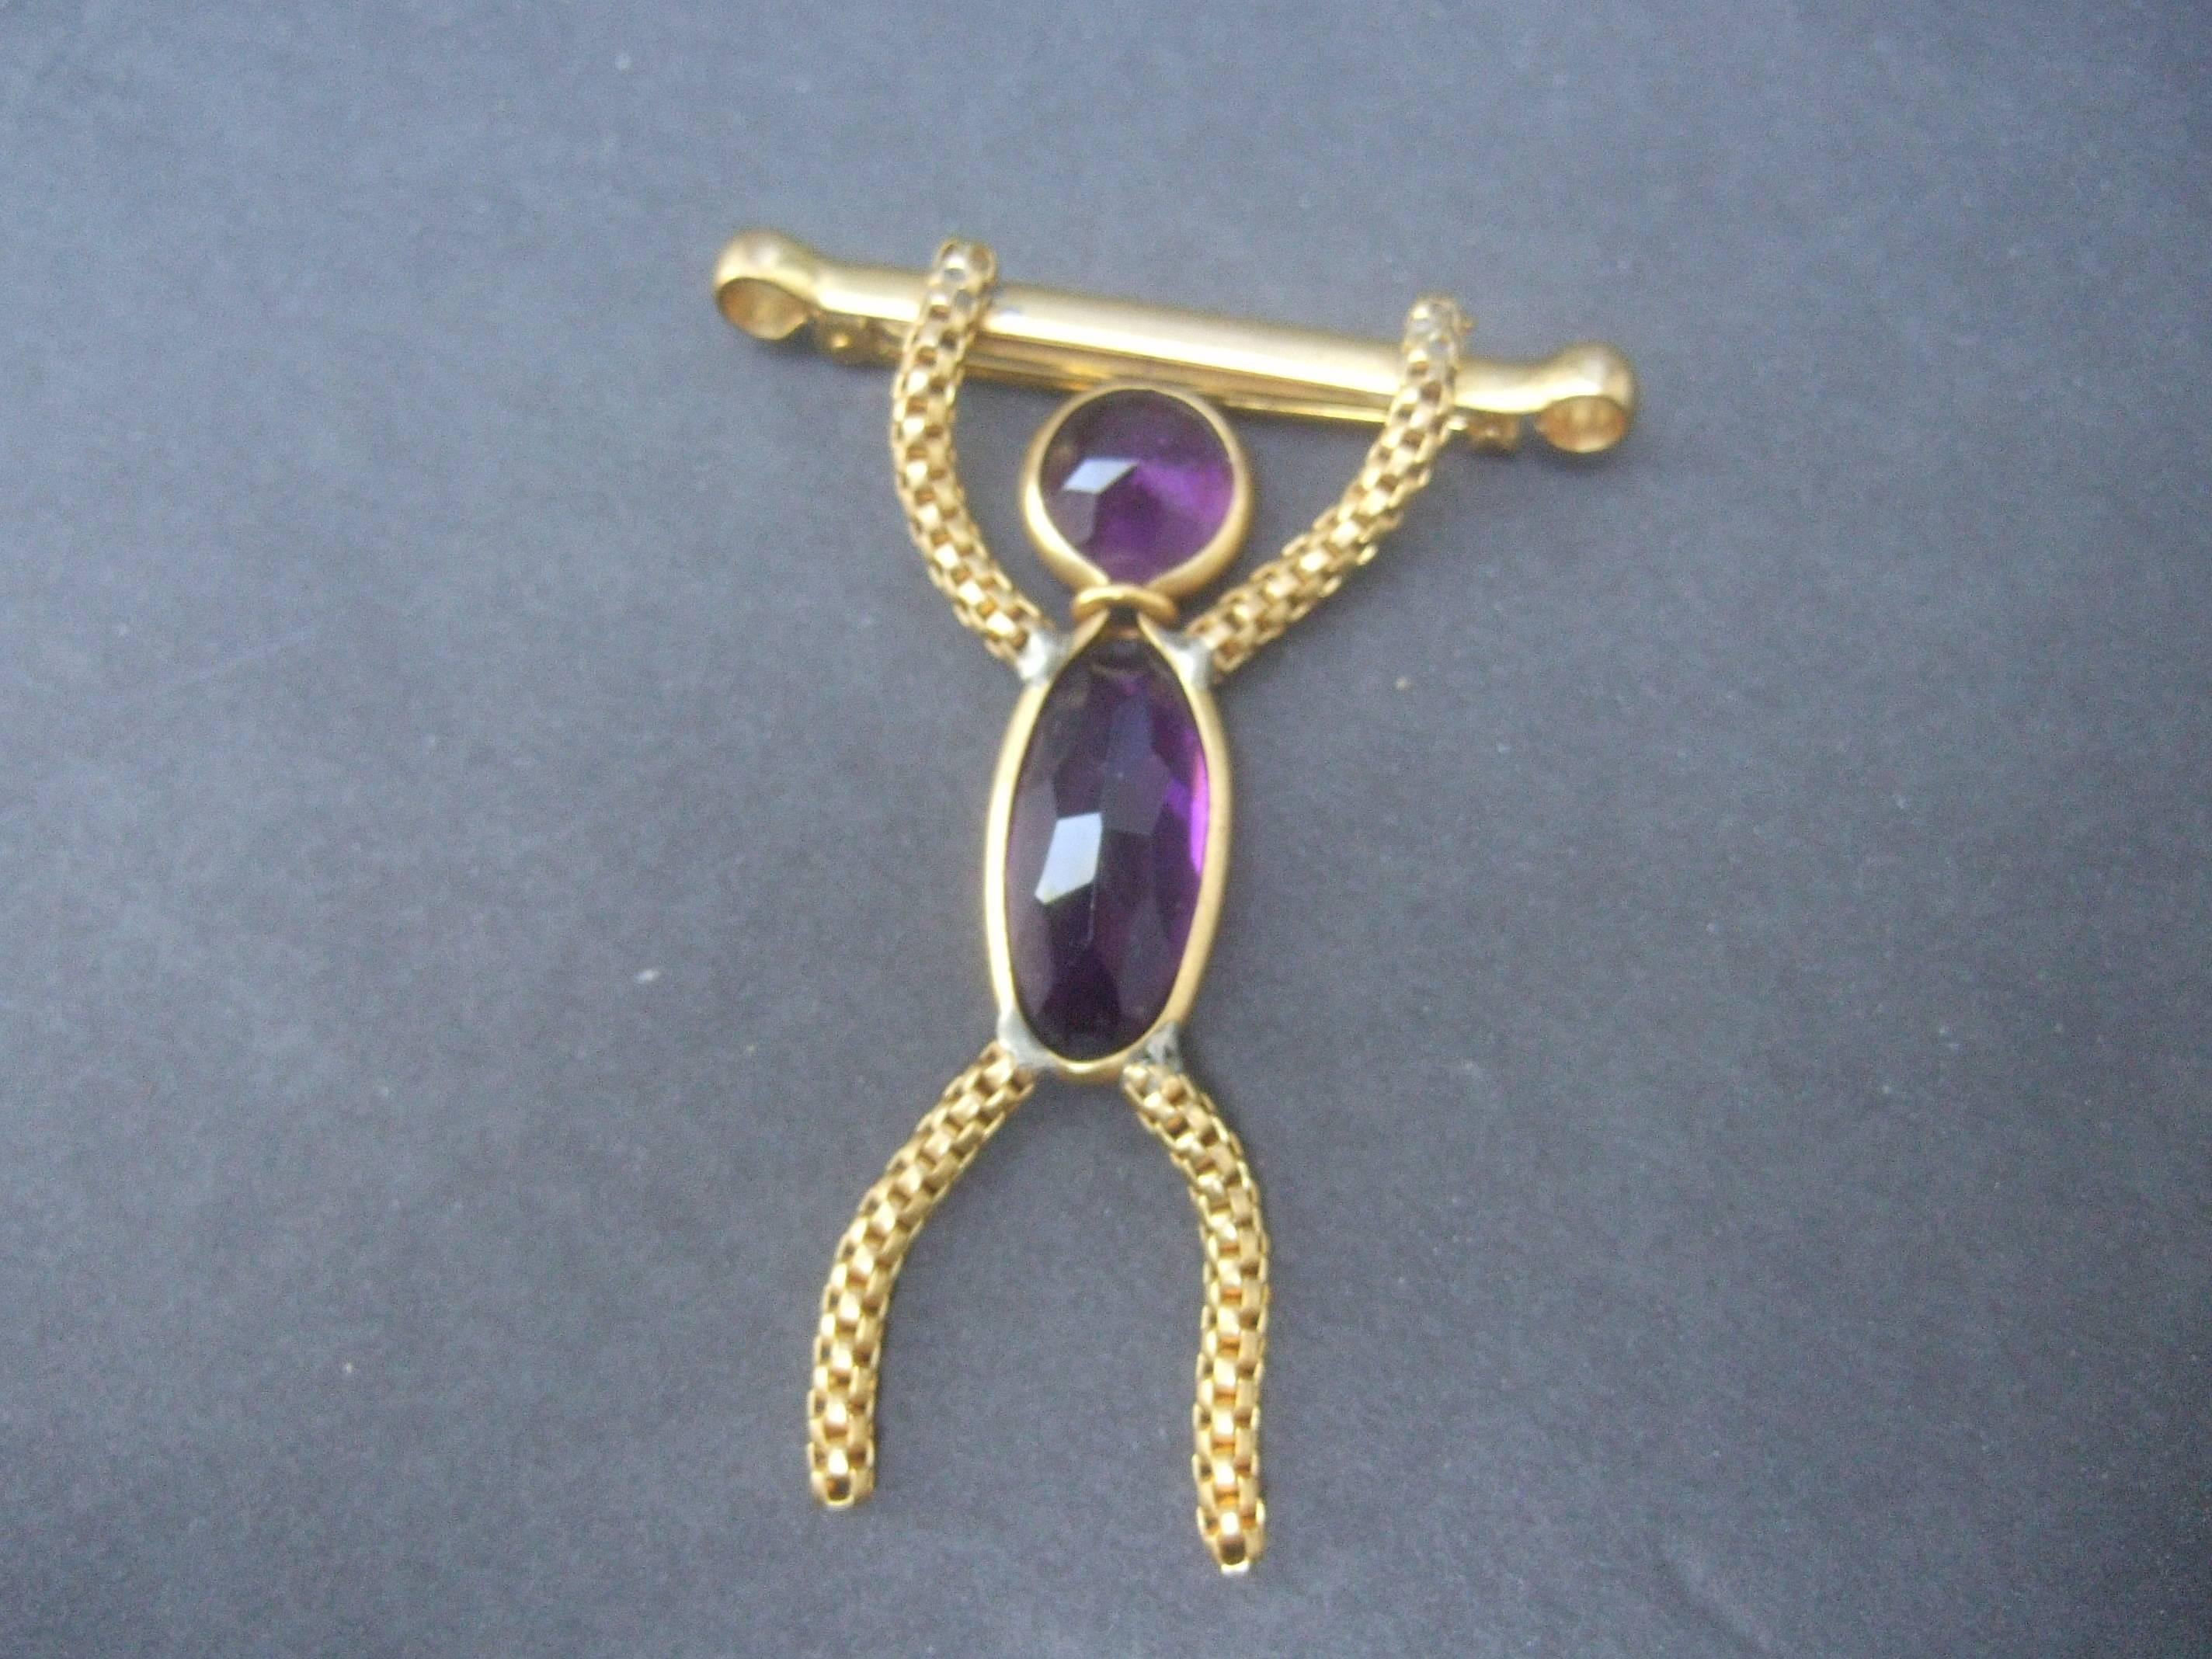 Women's Whimsical Figural Hang Man Crystal Brooch circa 1960 For Sale